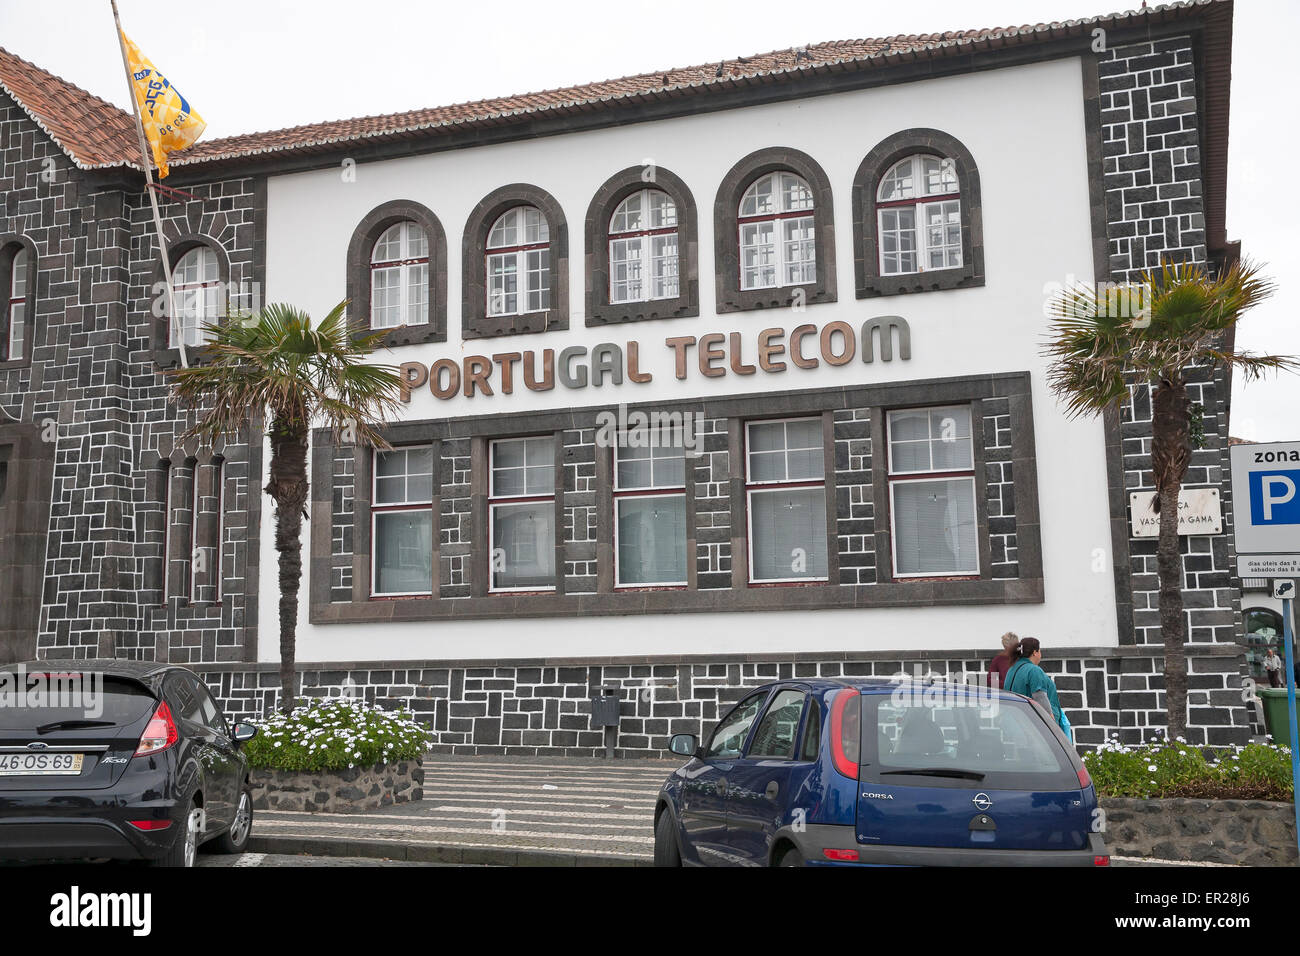 Portugal Telecom building in the Azores Stock Photo